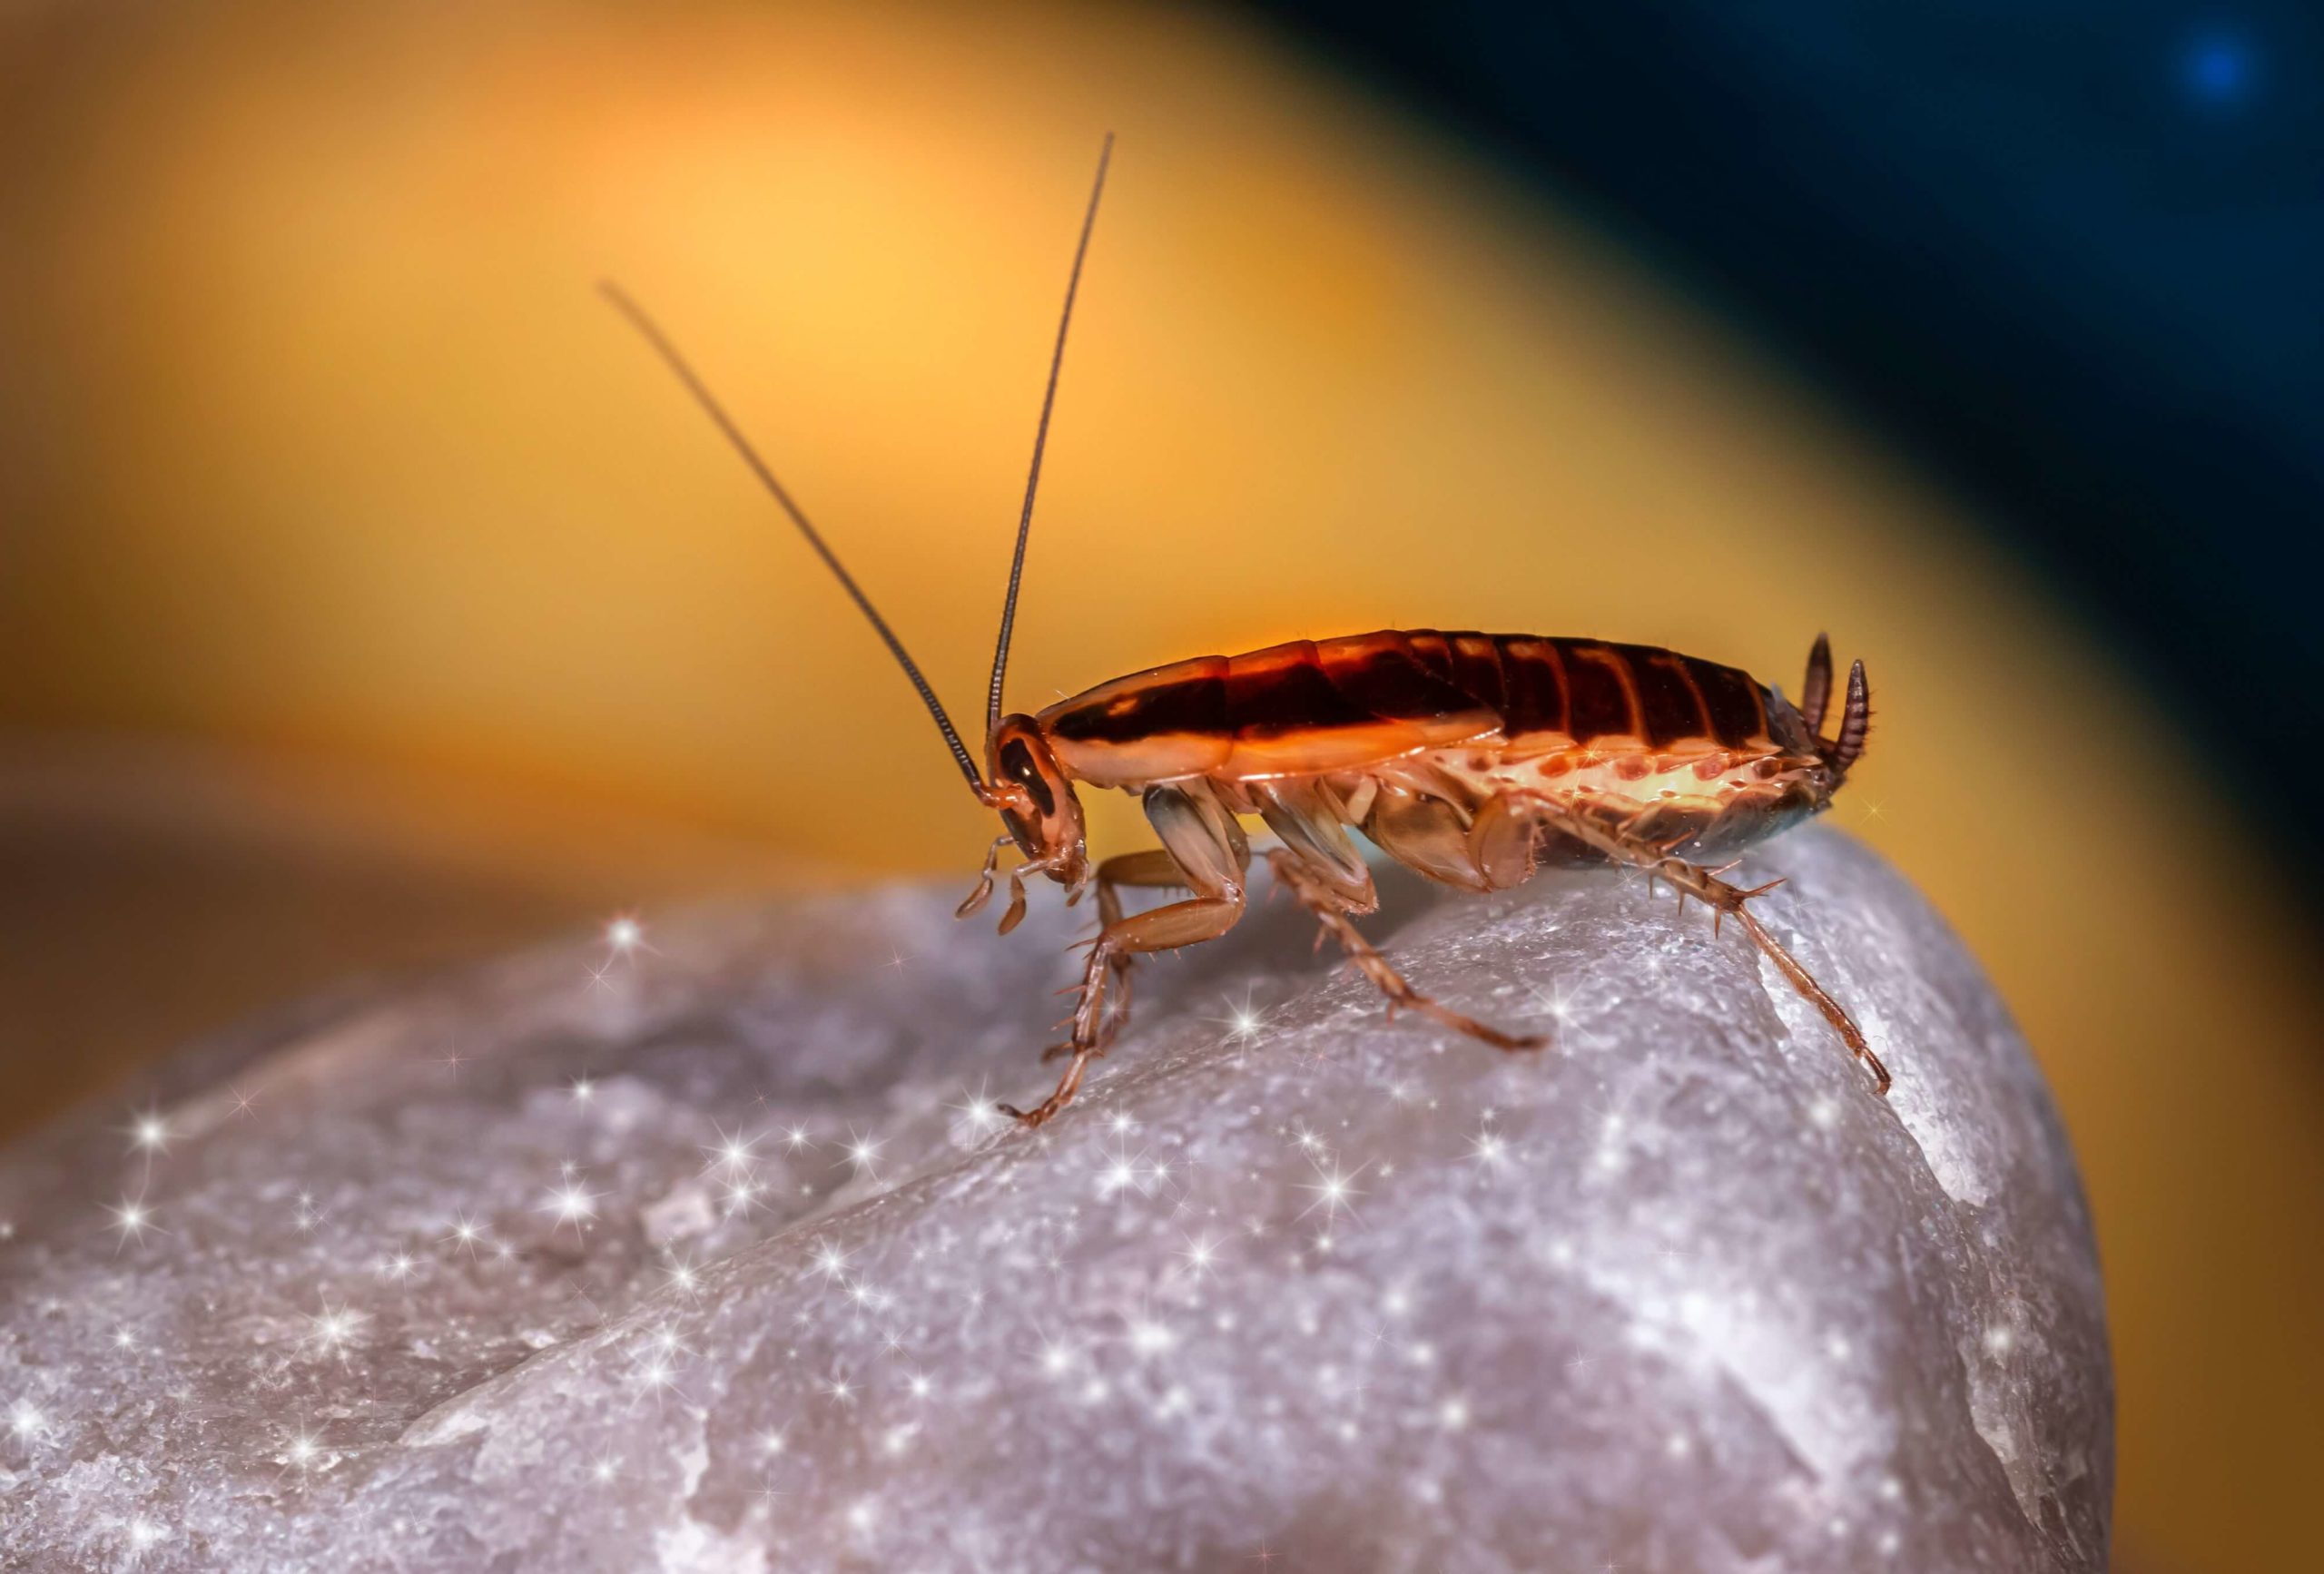 Picture of a cockroach - what does their poop look like?